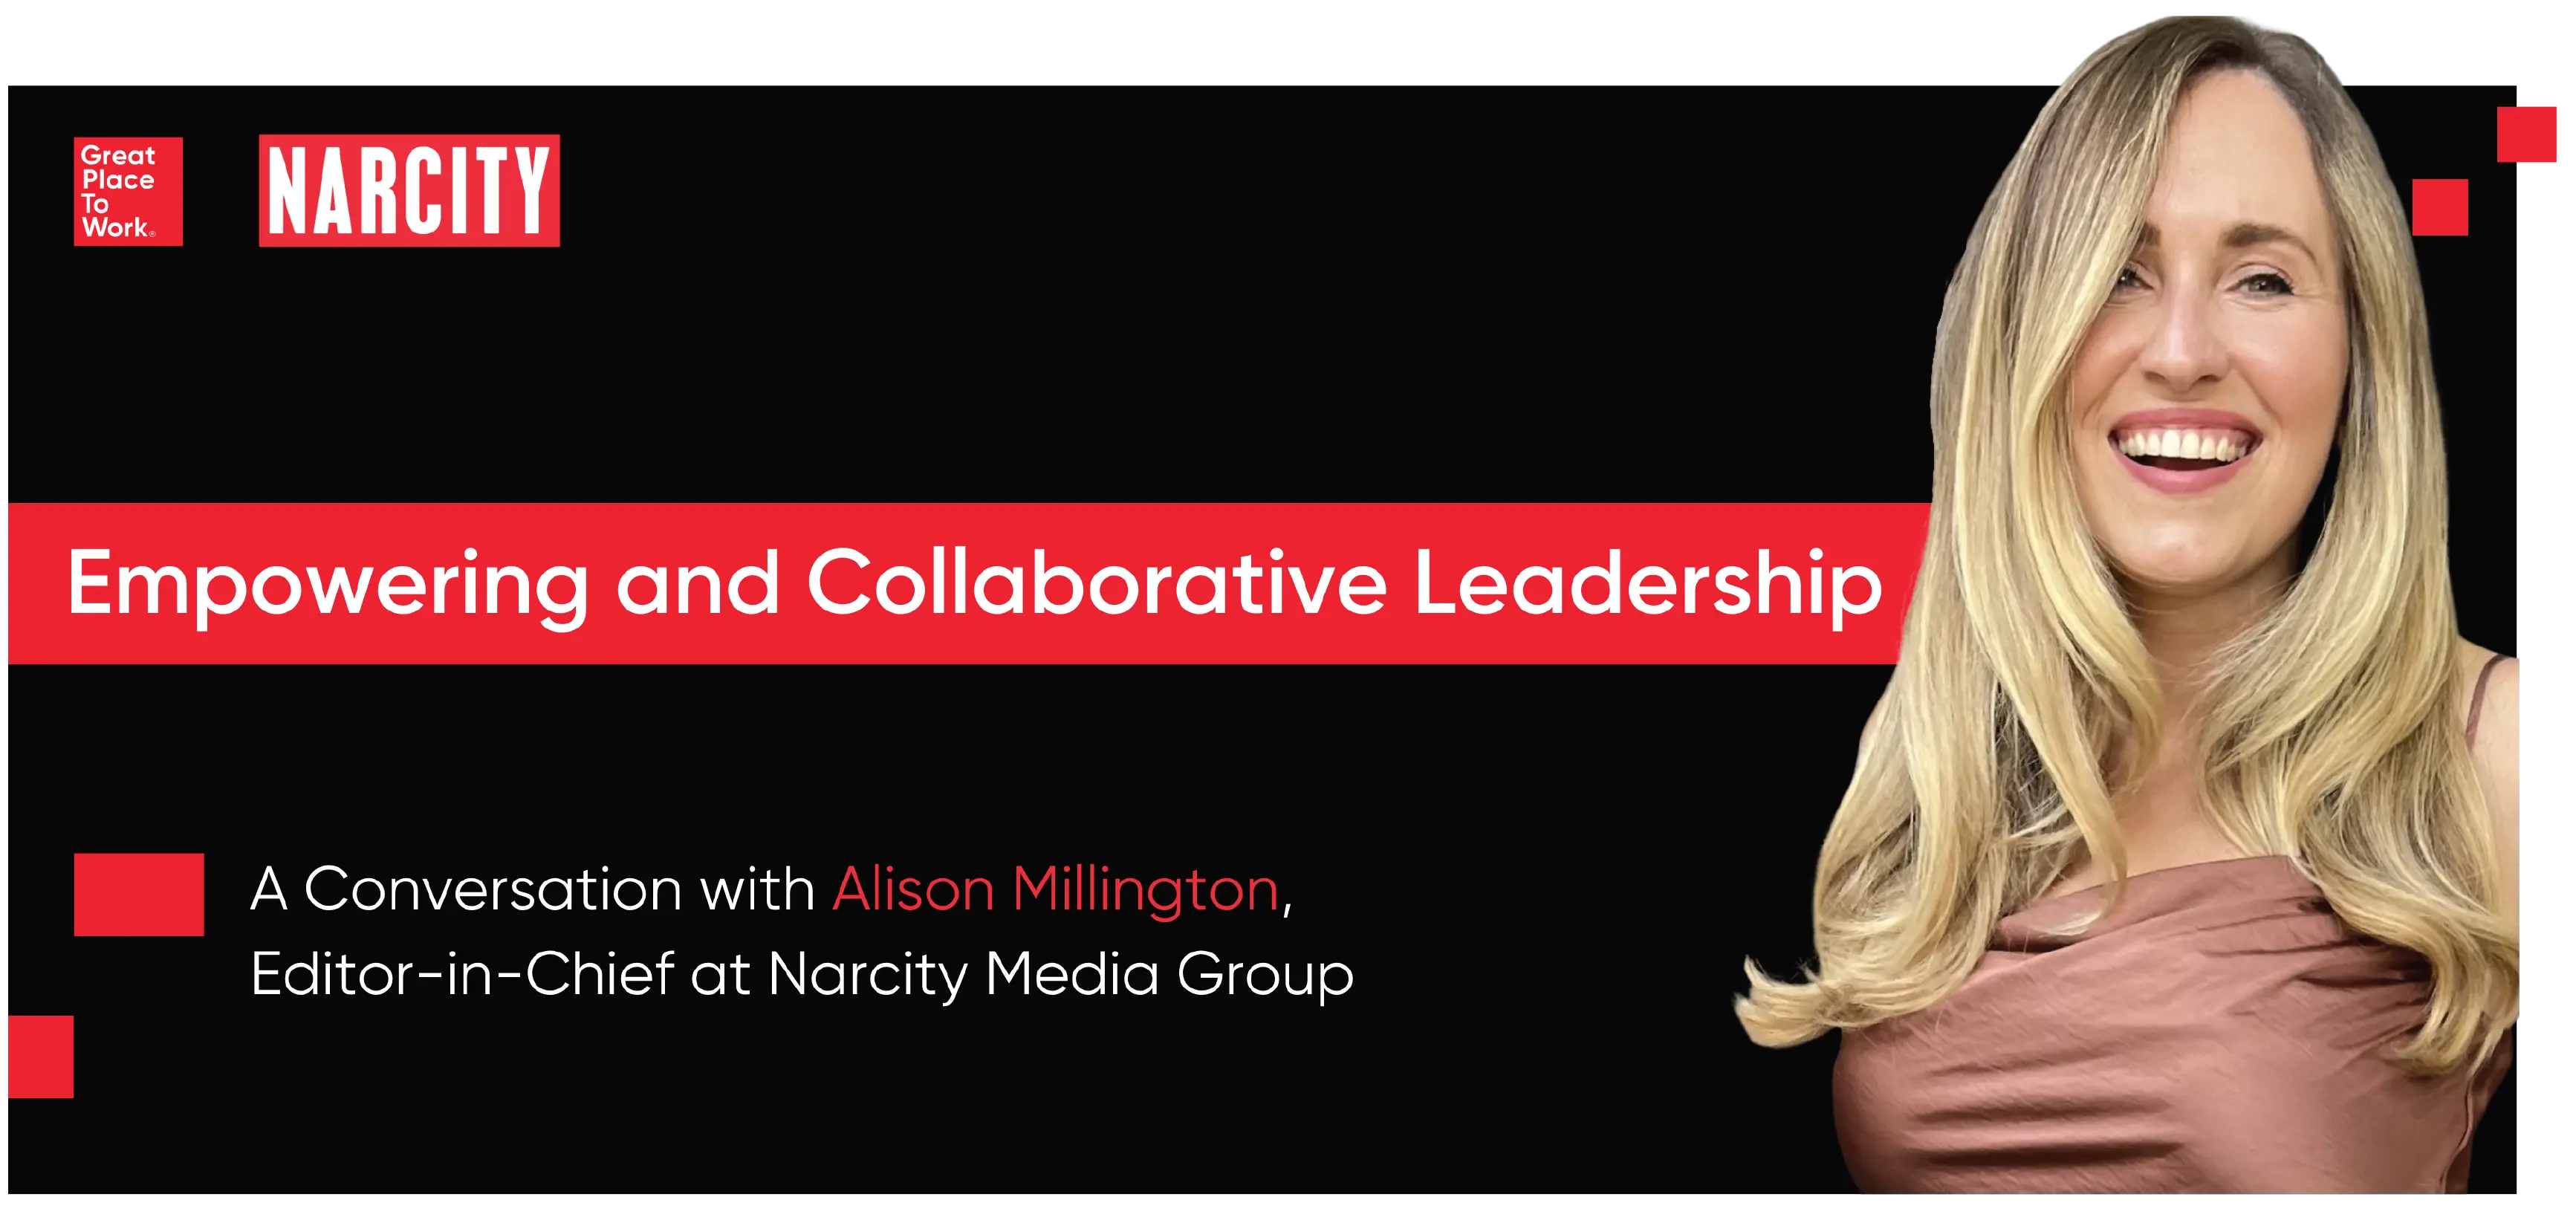  Empowering and Collaborative Leadership - A Conversation with Alison Millington,  Editor-in-Chief at Narcity Media Group